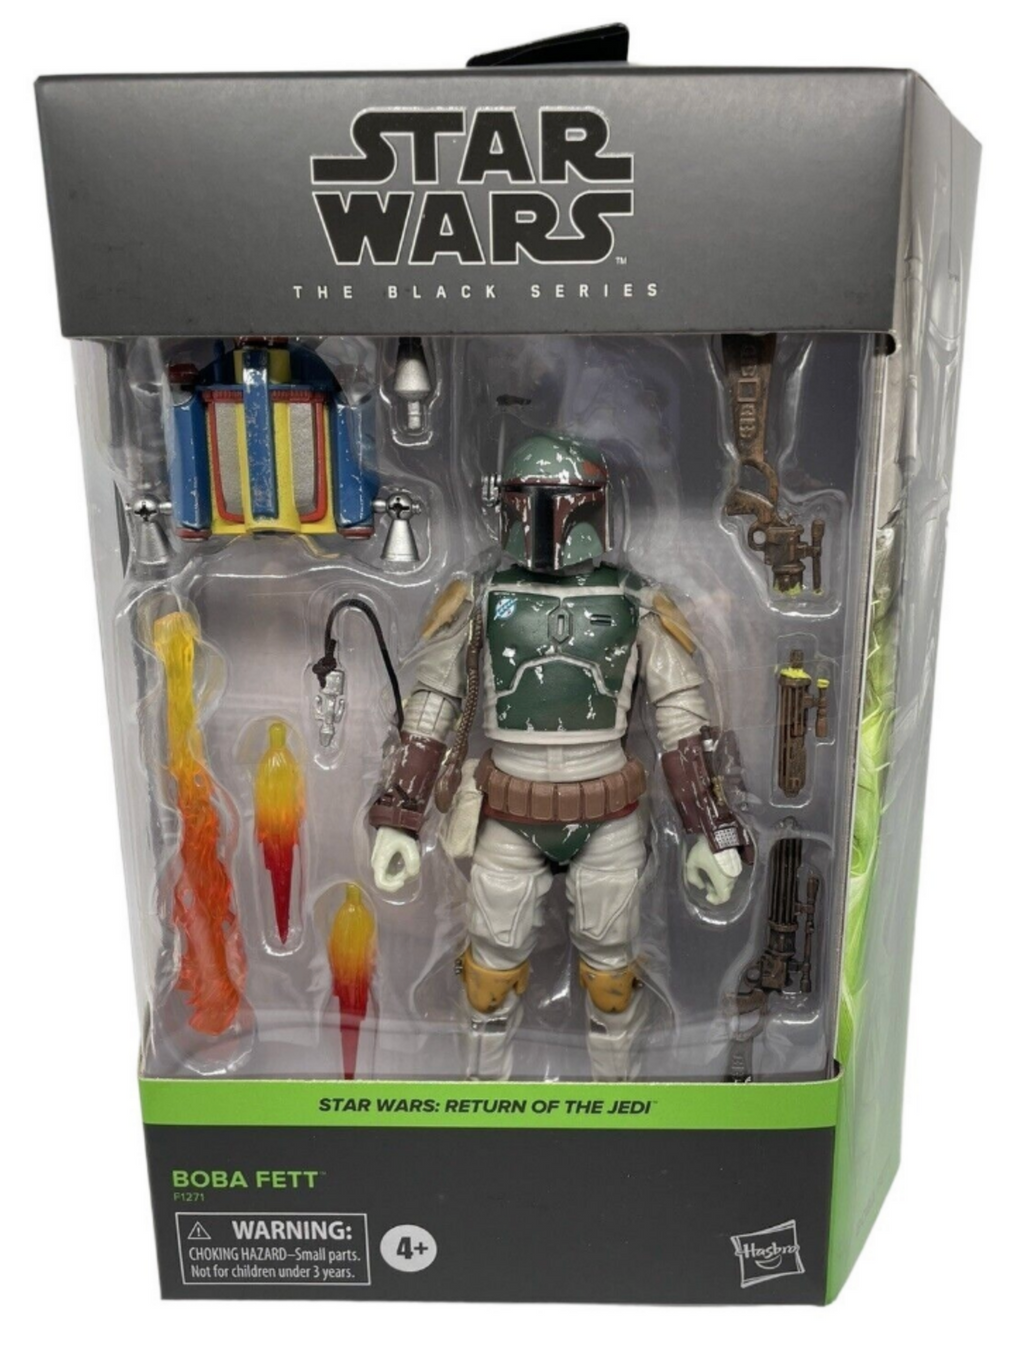 Star Wars Black Series Boba Fett Return of the Jedi 6 Inch Deluxe Collectible Action Figure Hasbro